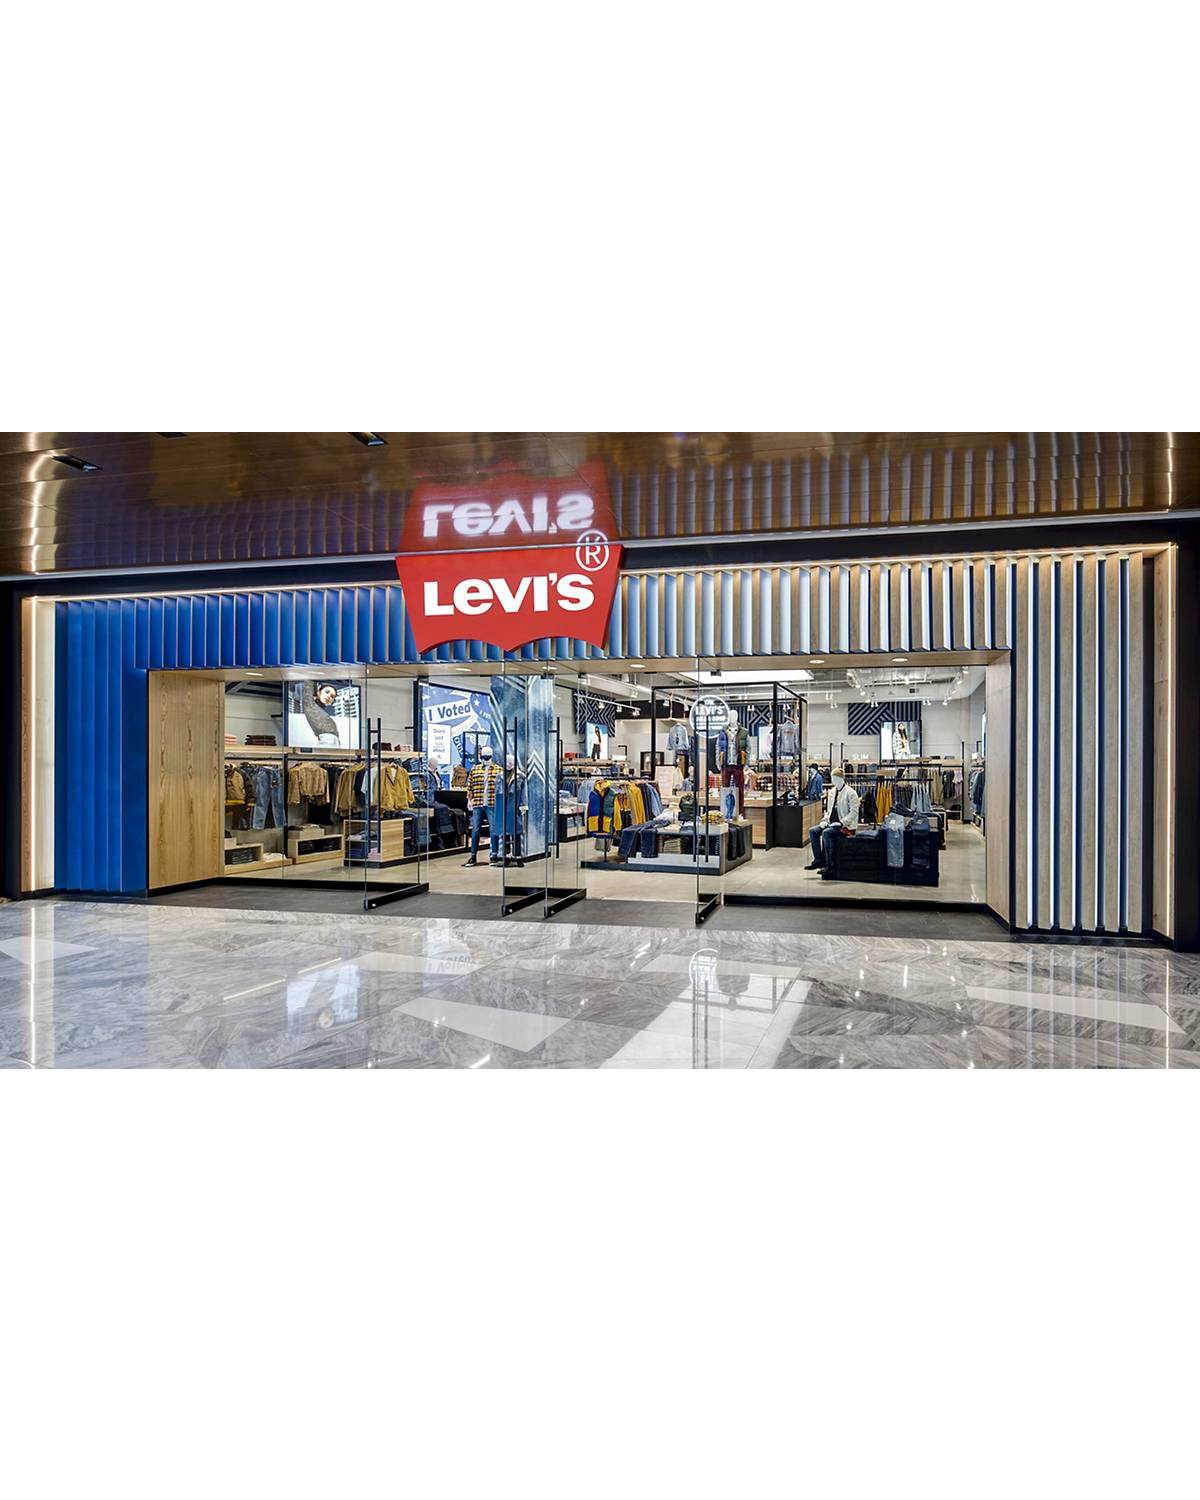 Levi's Patch Wall